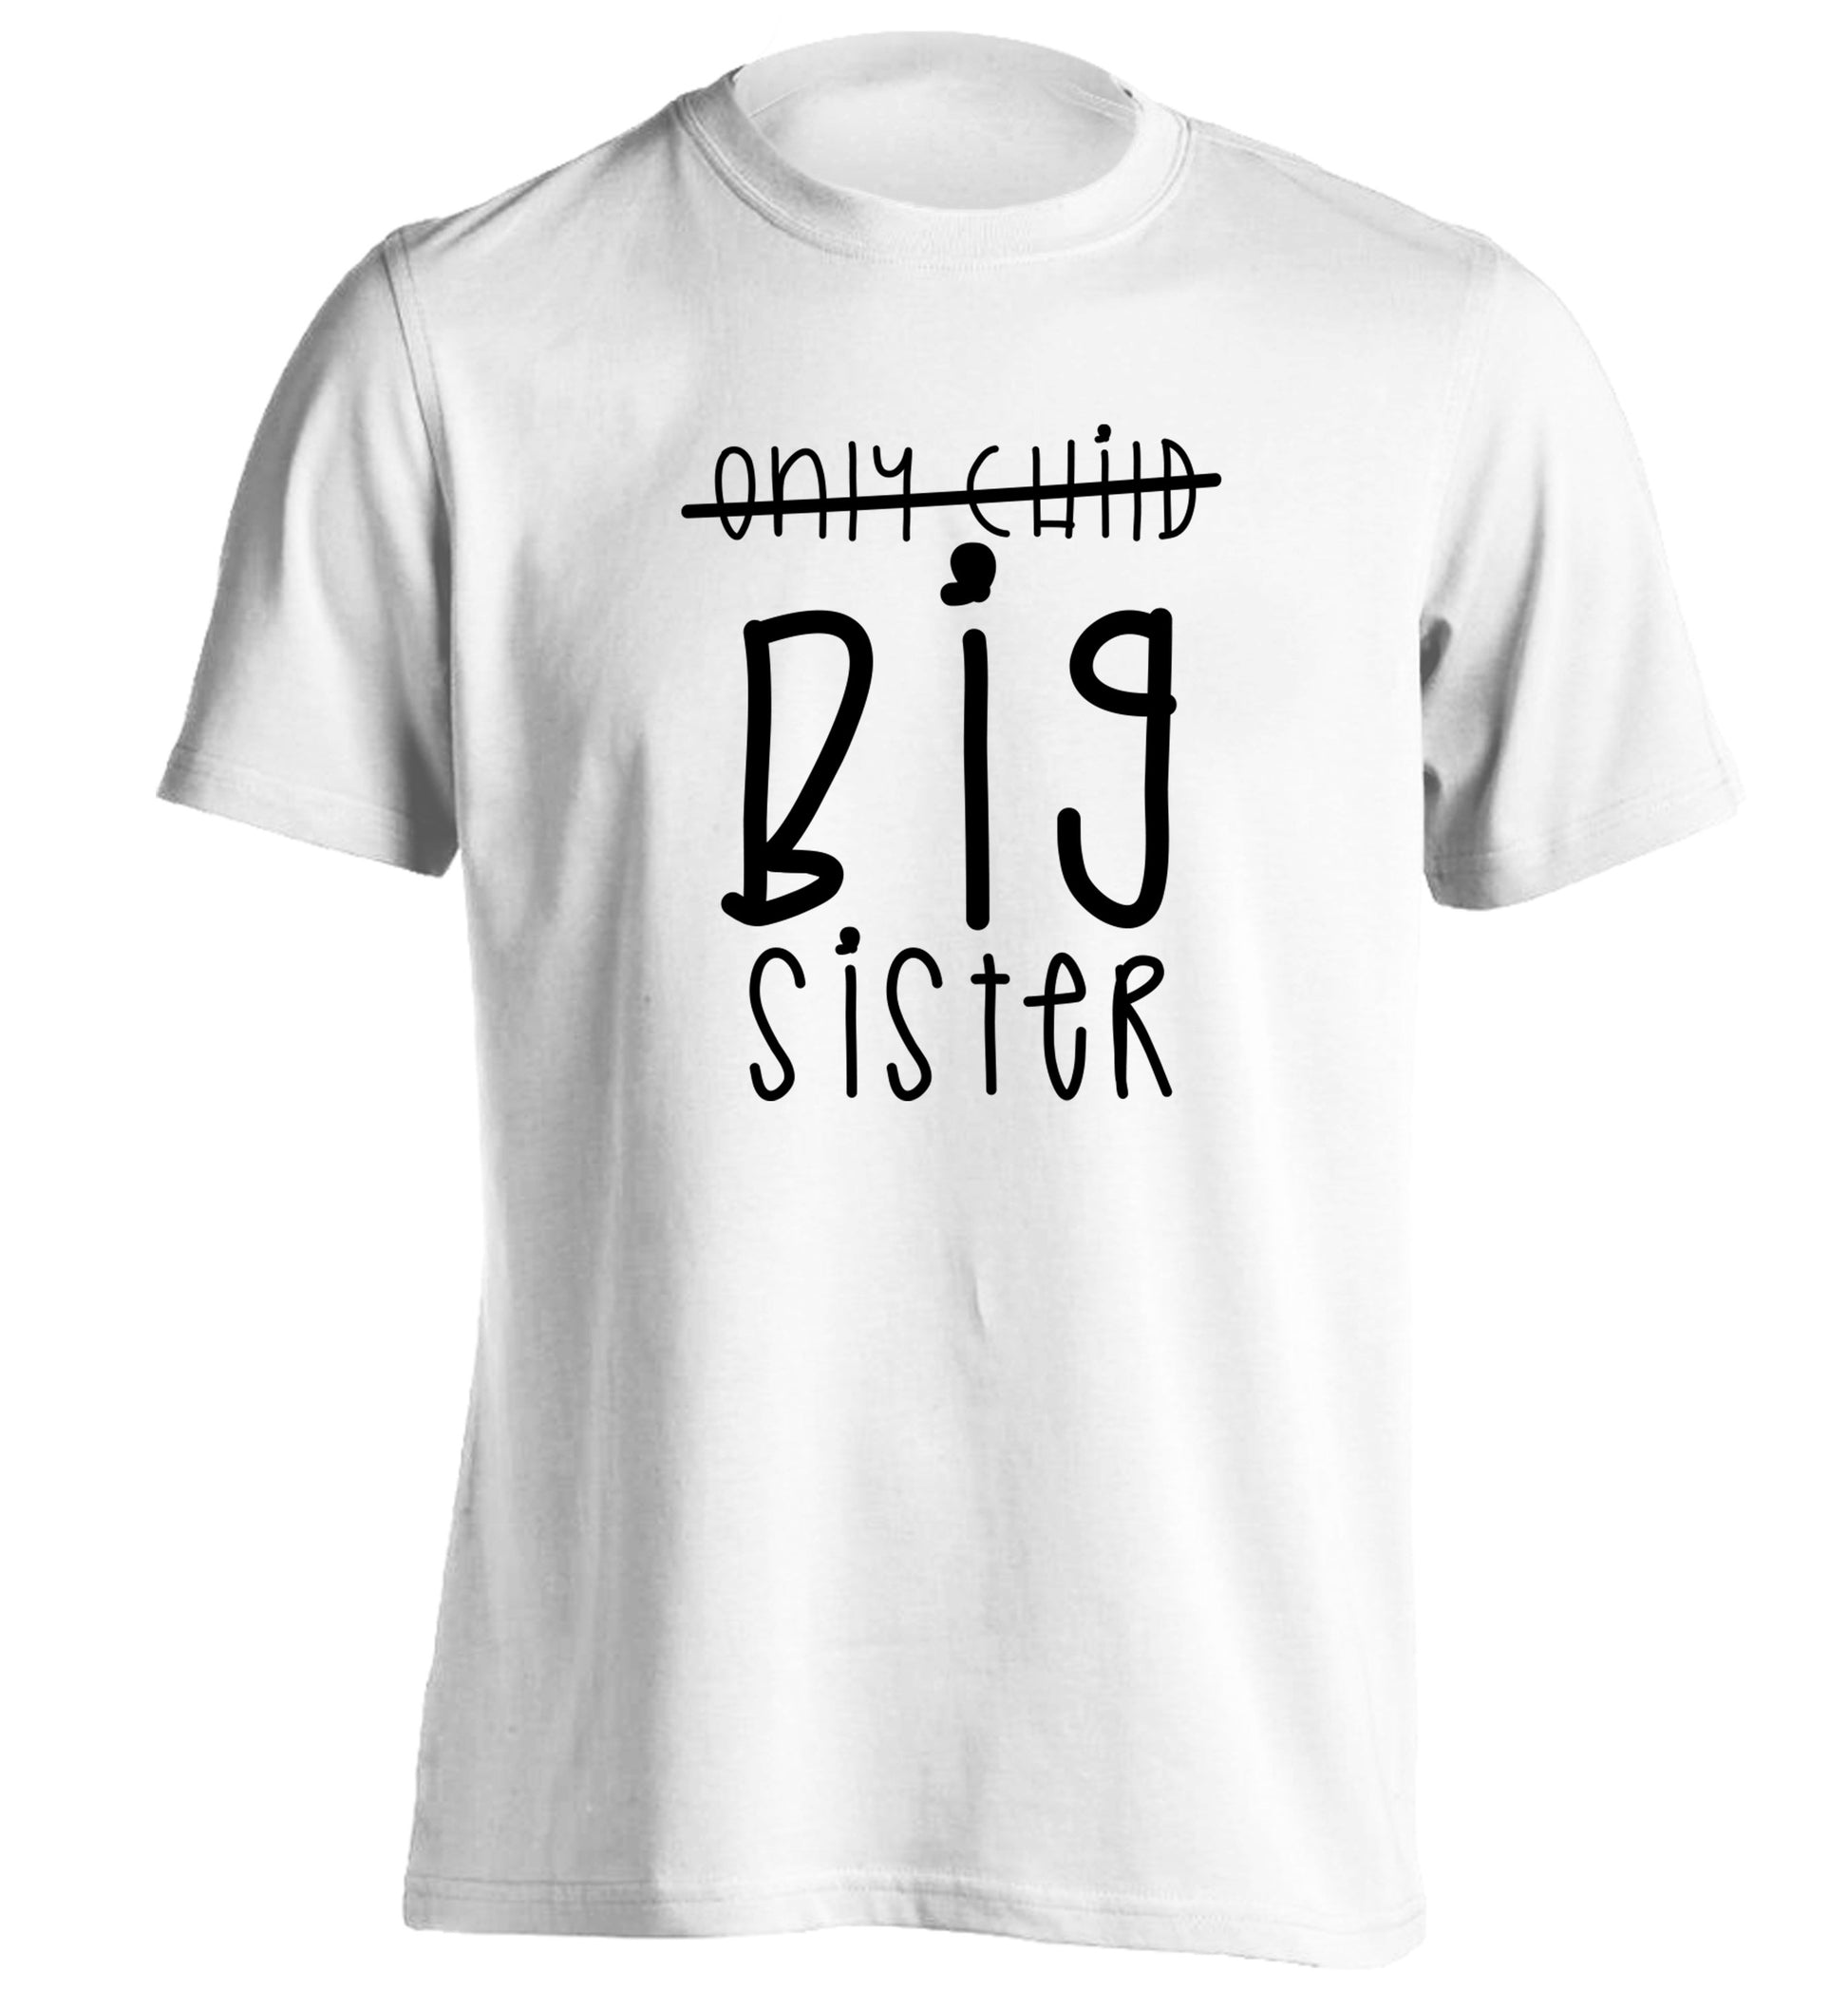 Only child big sister adults unisex white Tshirt 2XL